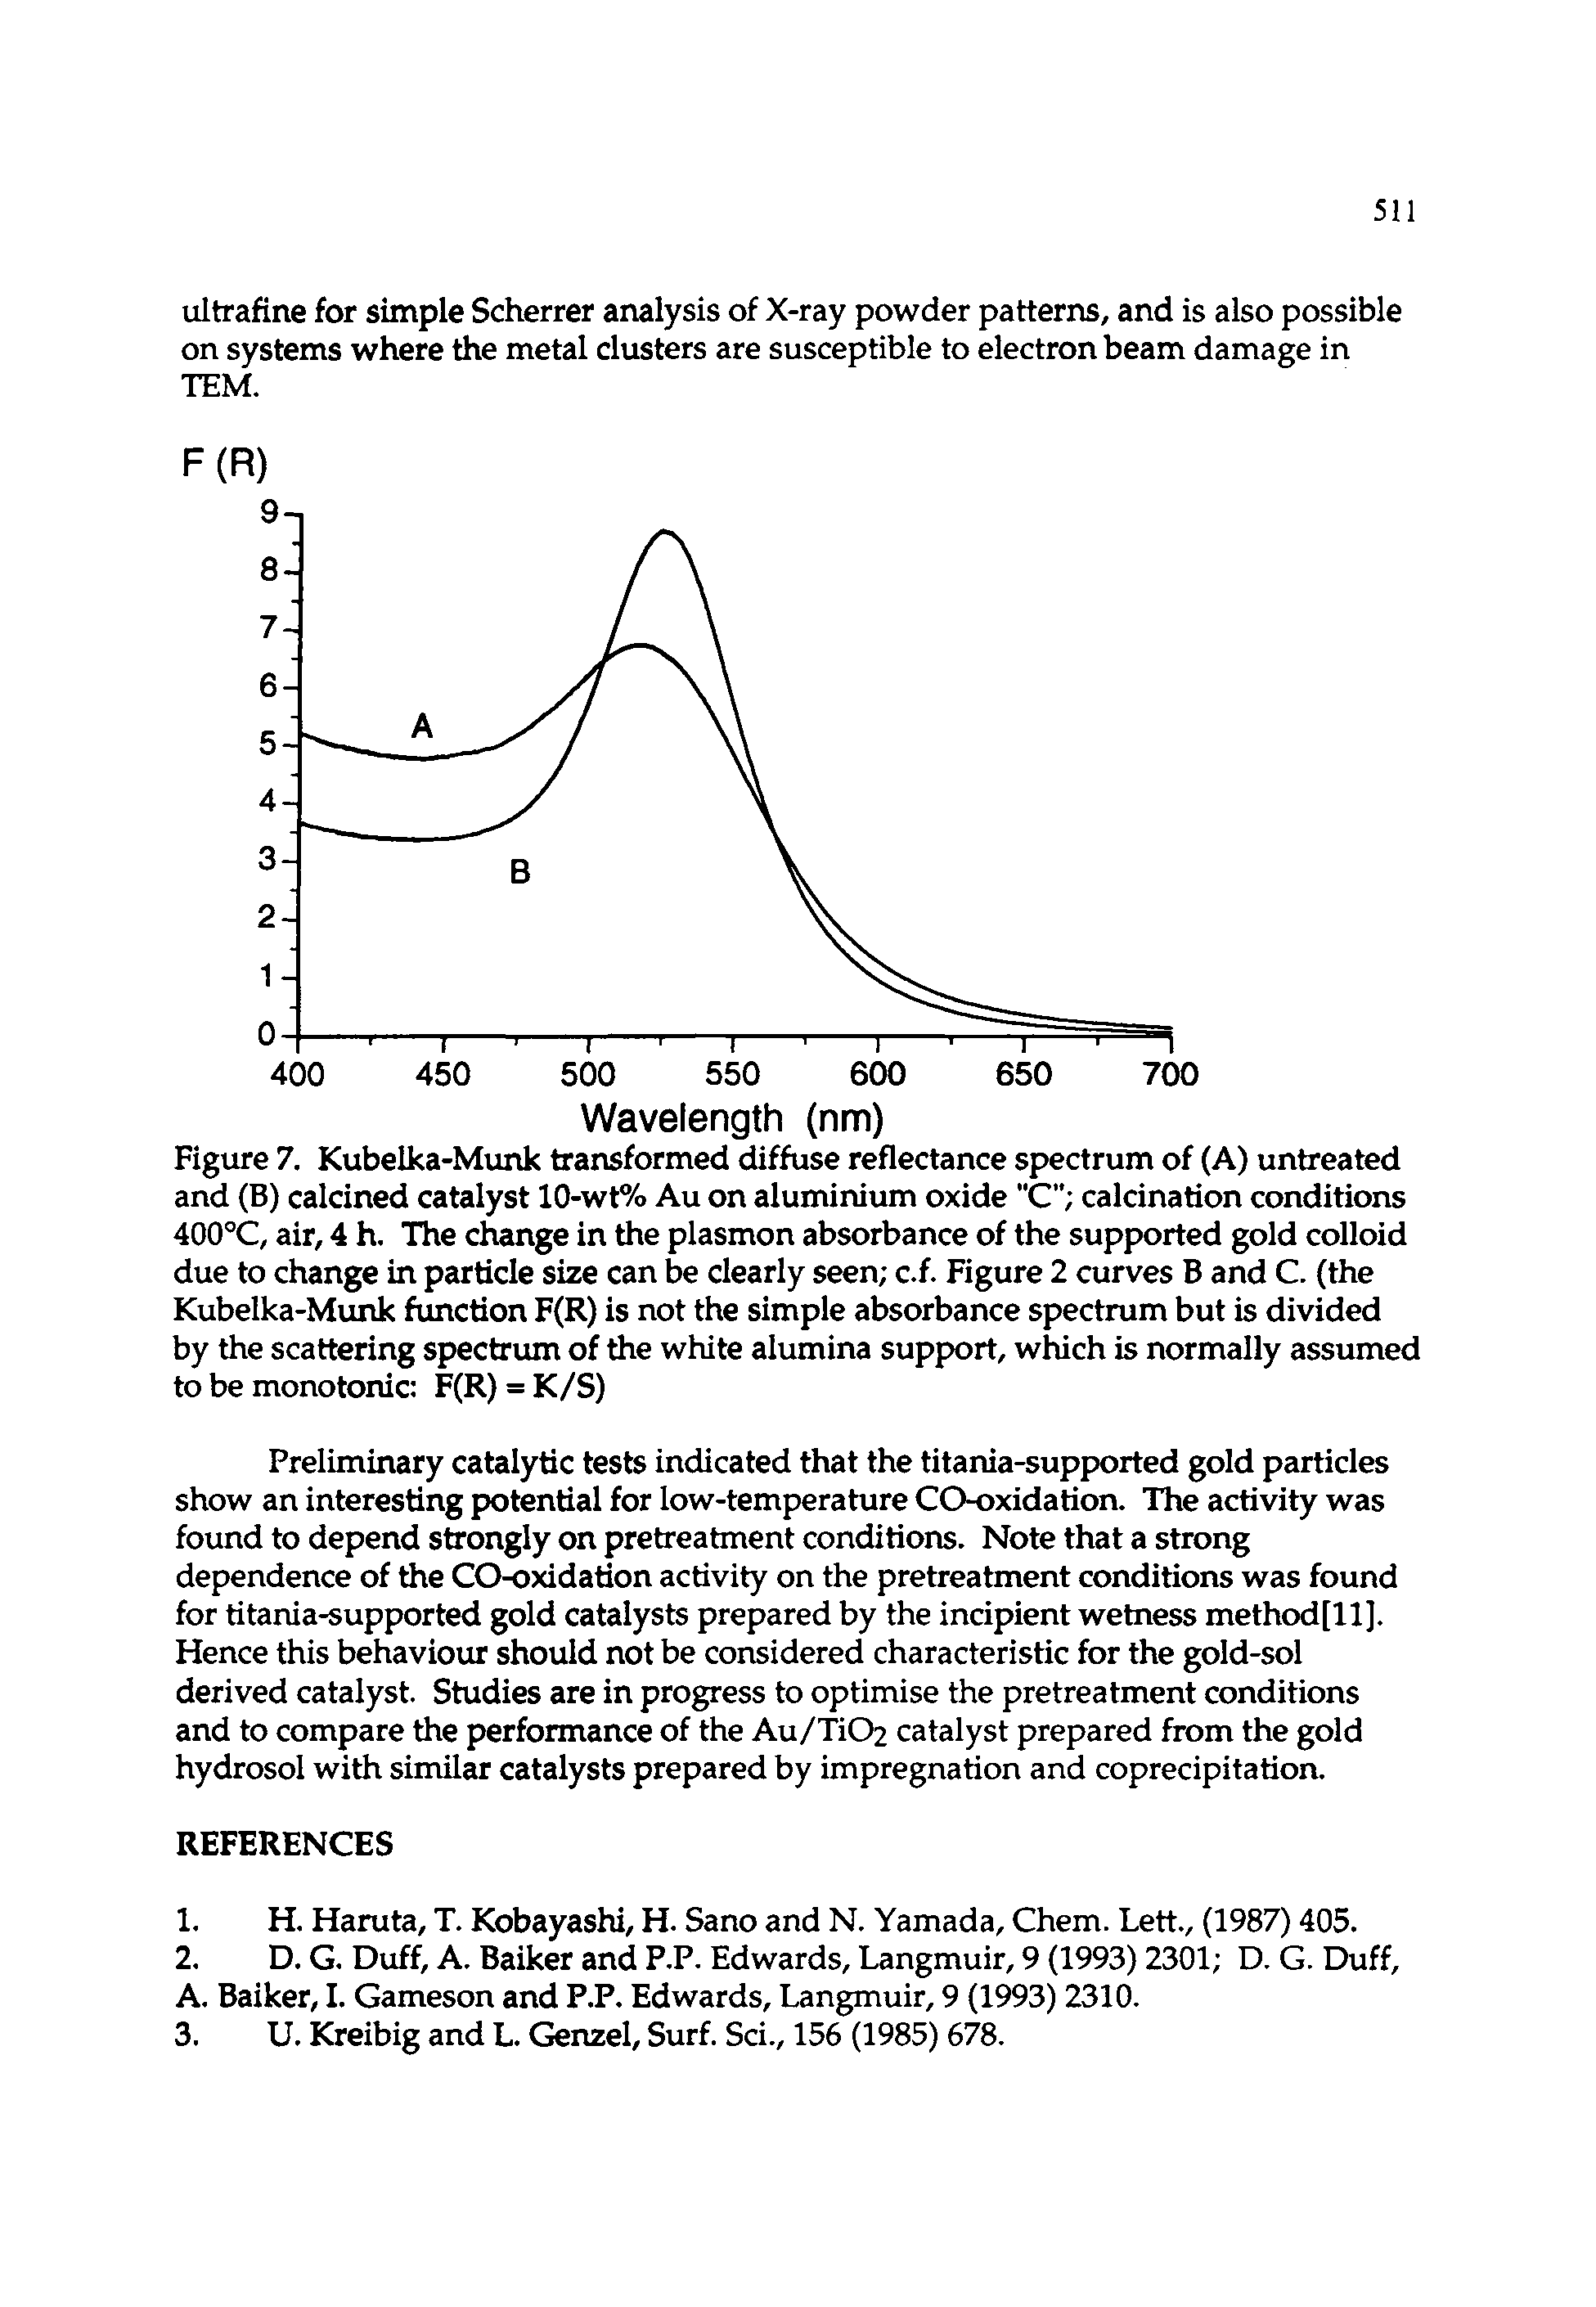 Figure 7. Kubelka-Munk transformed diffuse reflectance spectrum of (A) untreated and (B) calcined catalyst 10-wt% Au on aluminium oxide "C" calcination conditions 400°C, air, 4 h. The change in the plasmon absorbance of the supported gold colloid due to change in particle size can be clearly seen c.f. Figure 2 curves B and C. (the Kubelka-Mumk function F(R) is not the simple absorbance spectrum but is divided by the scattering spectrum of the white alumina support, which is normally assumed to be monotonic F(R) = K/S)...